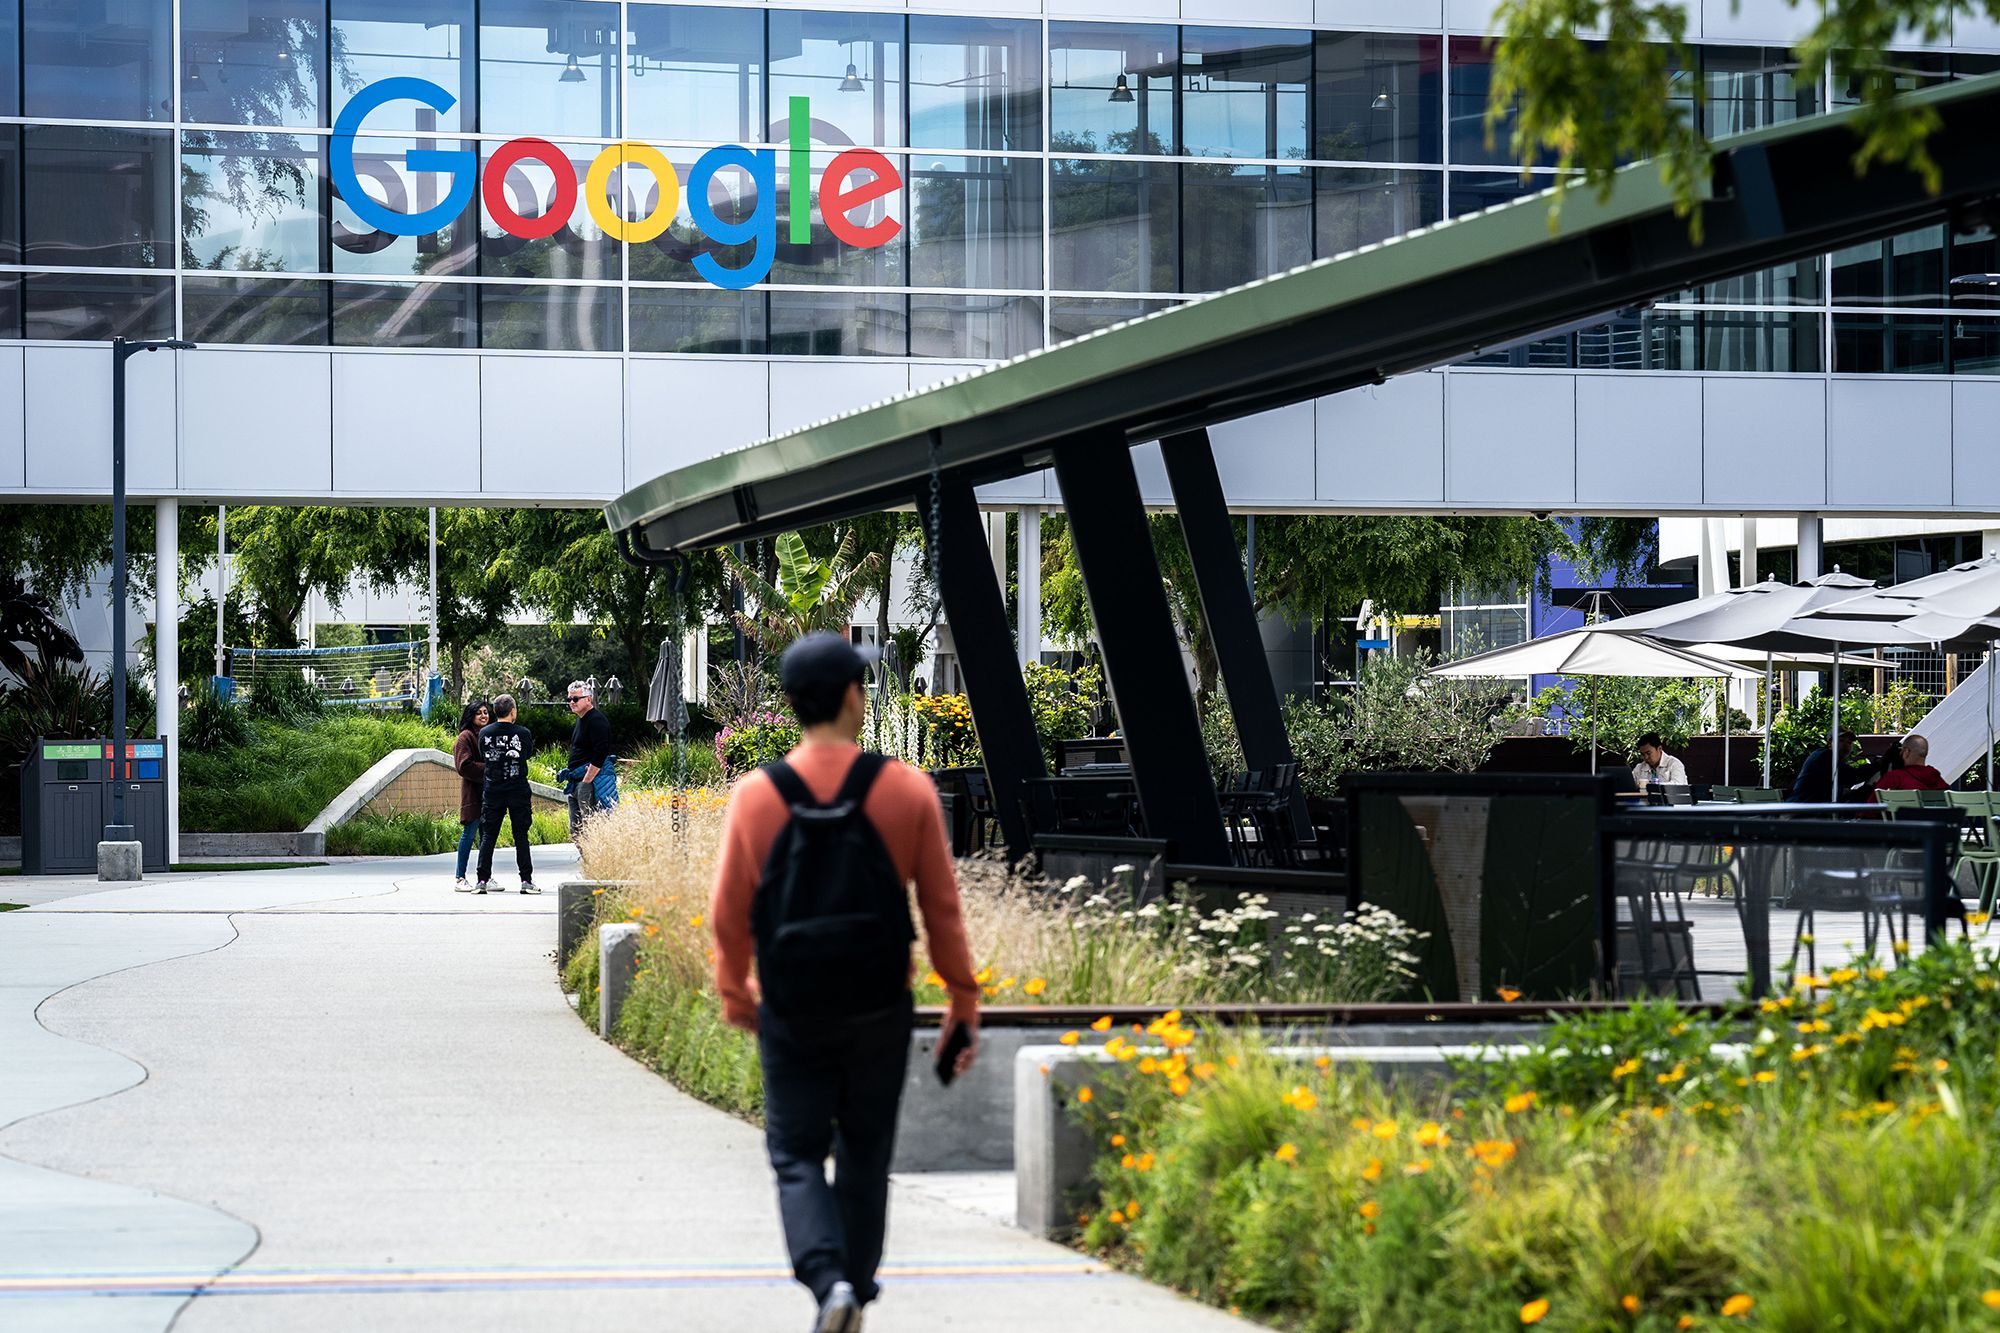 News publishers group urges government to investigate Google for blocking some California news outlets